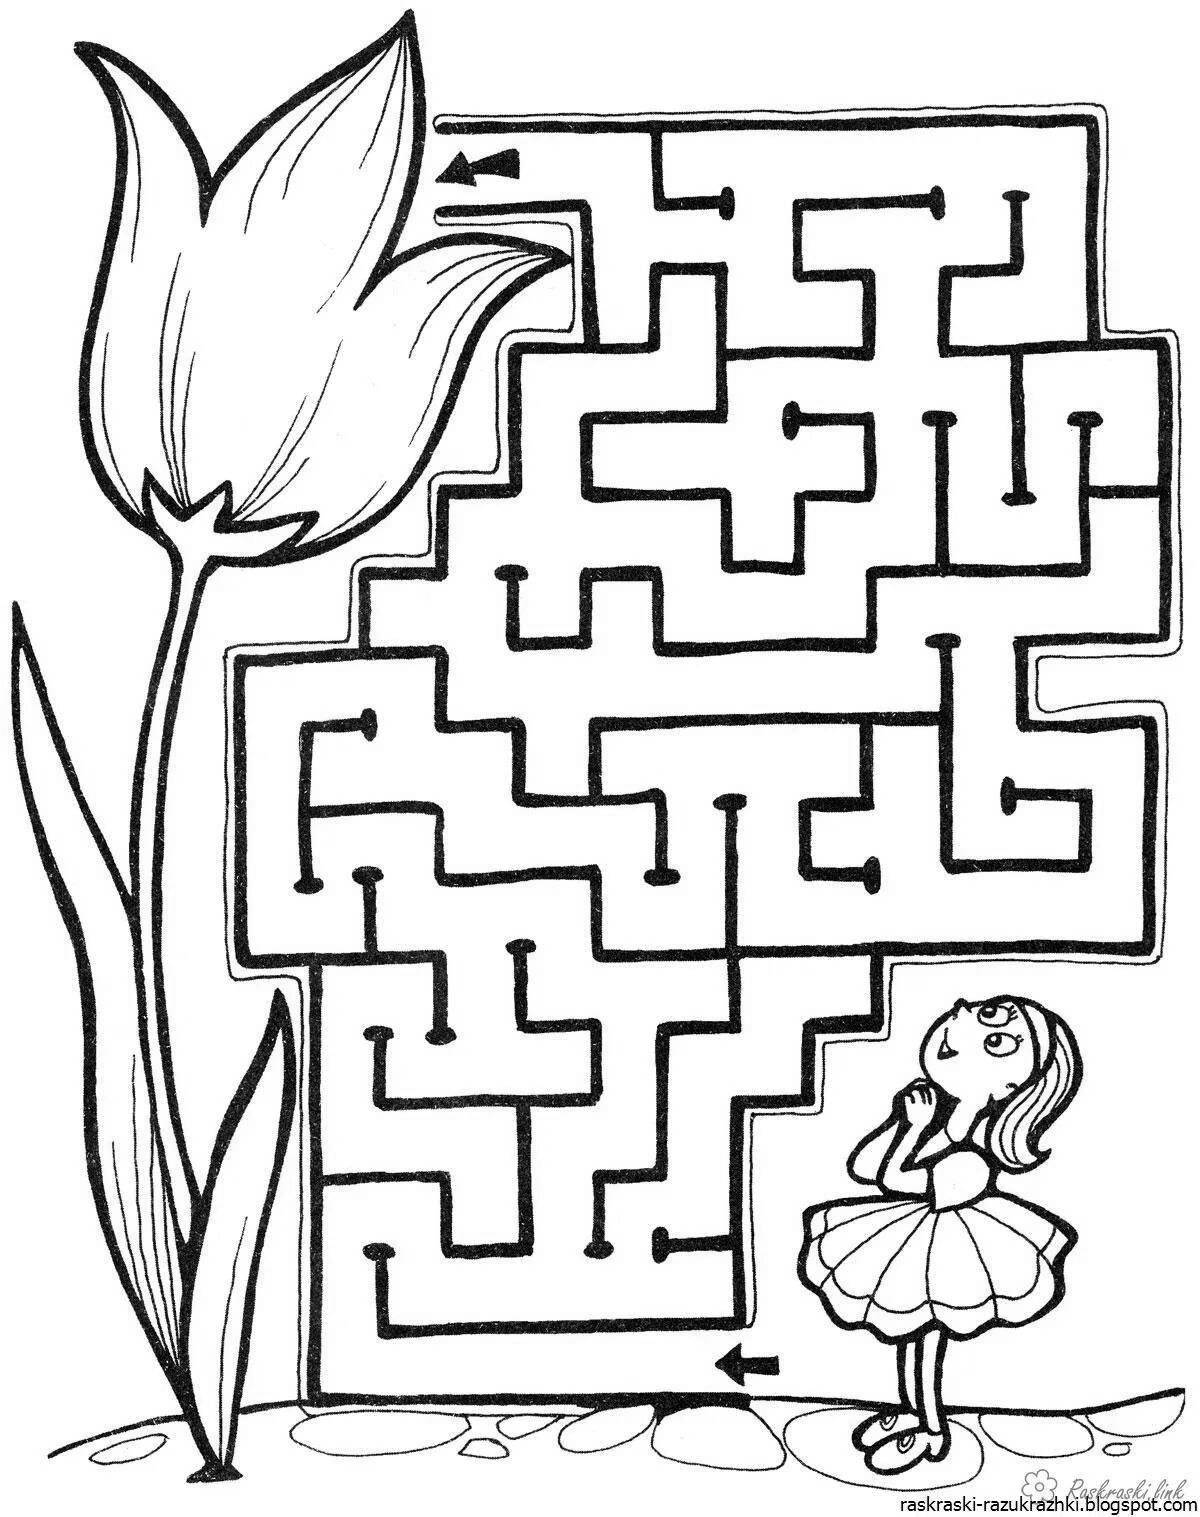 Live maze coloring book for 3-4 year olds